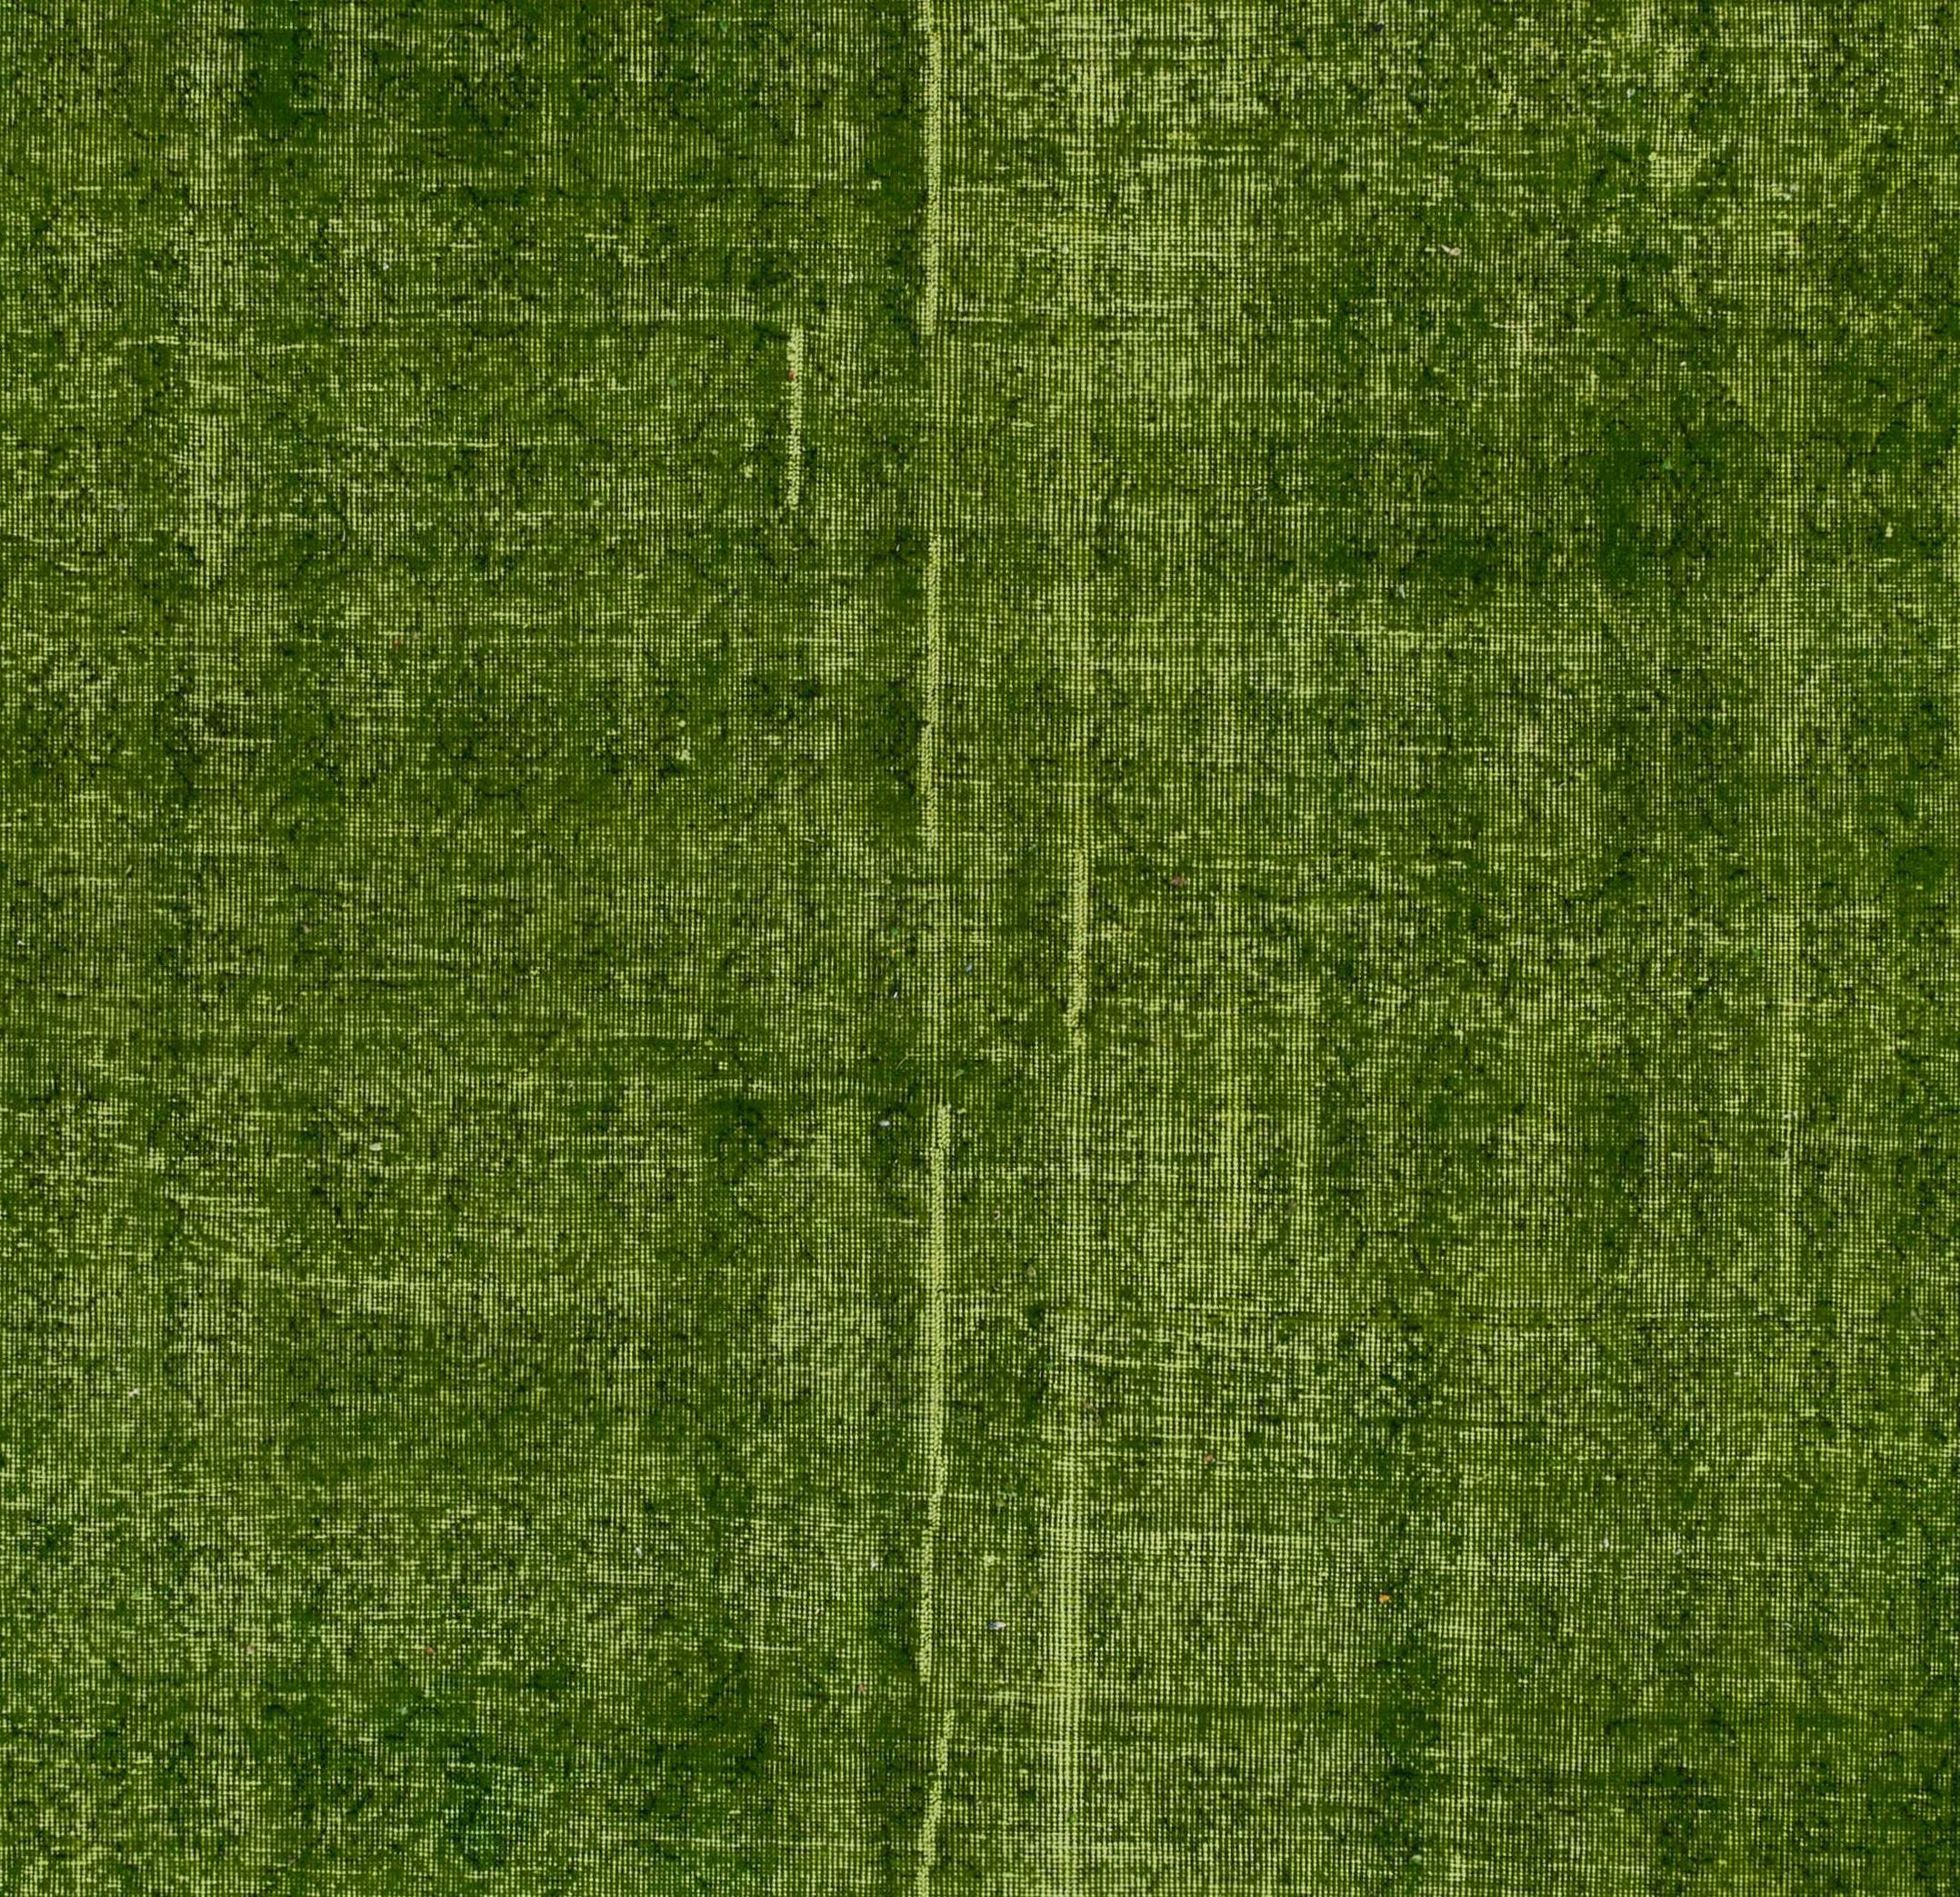 Hand-Woven 6.8x10 Ft Vintage Wool Rug OverDyed in Green Color. Great 4 Modern Interiors